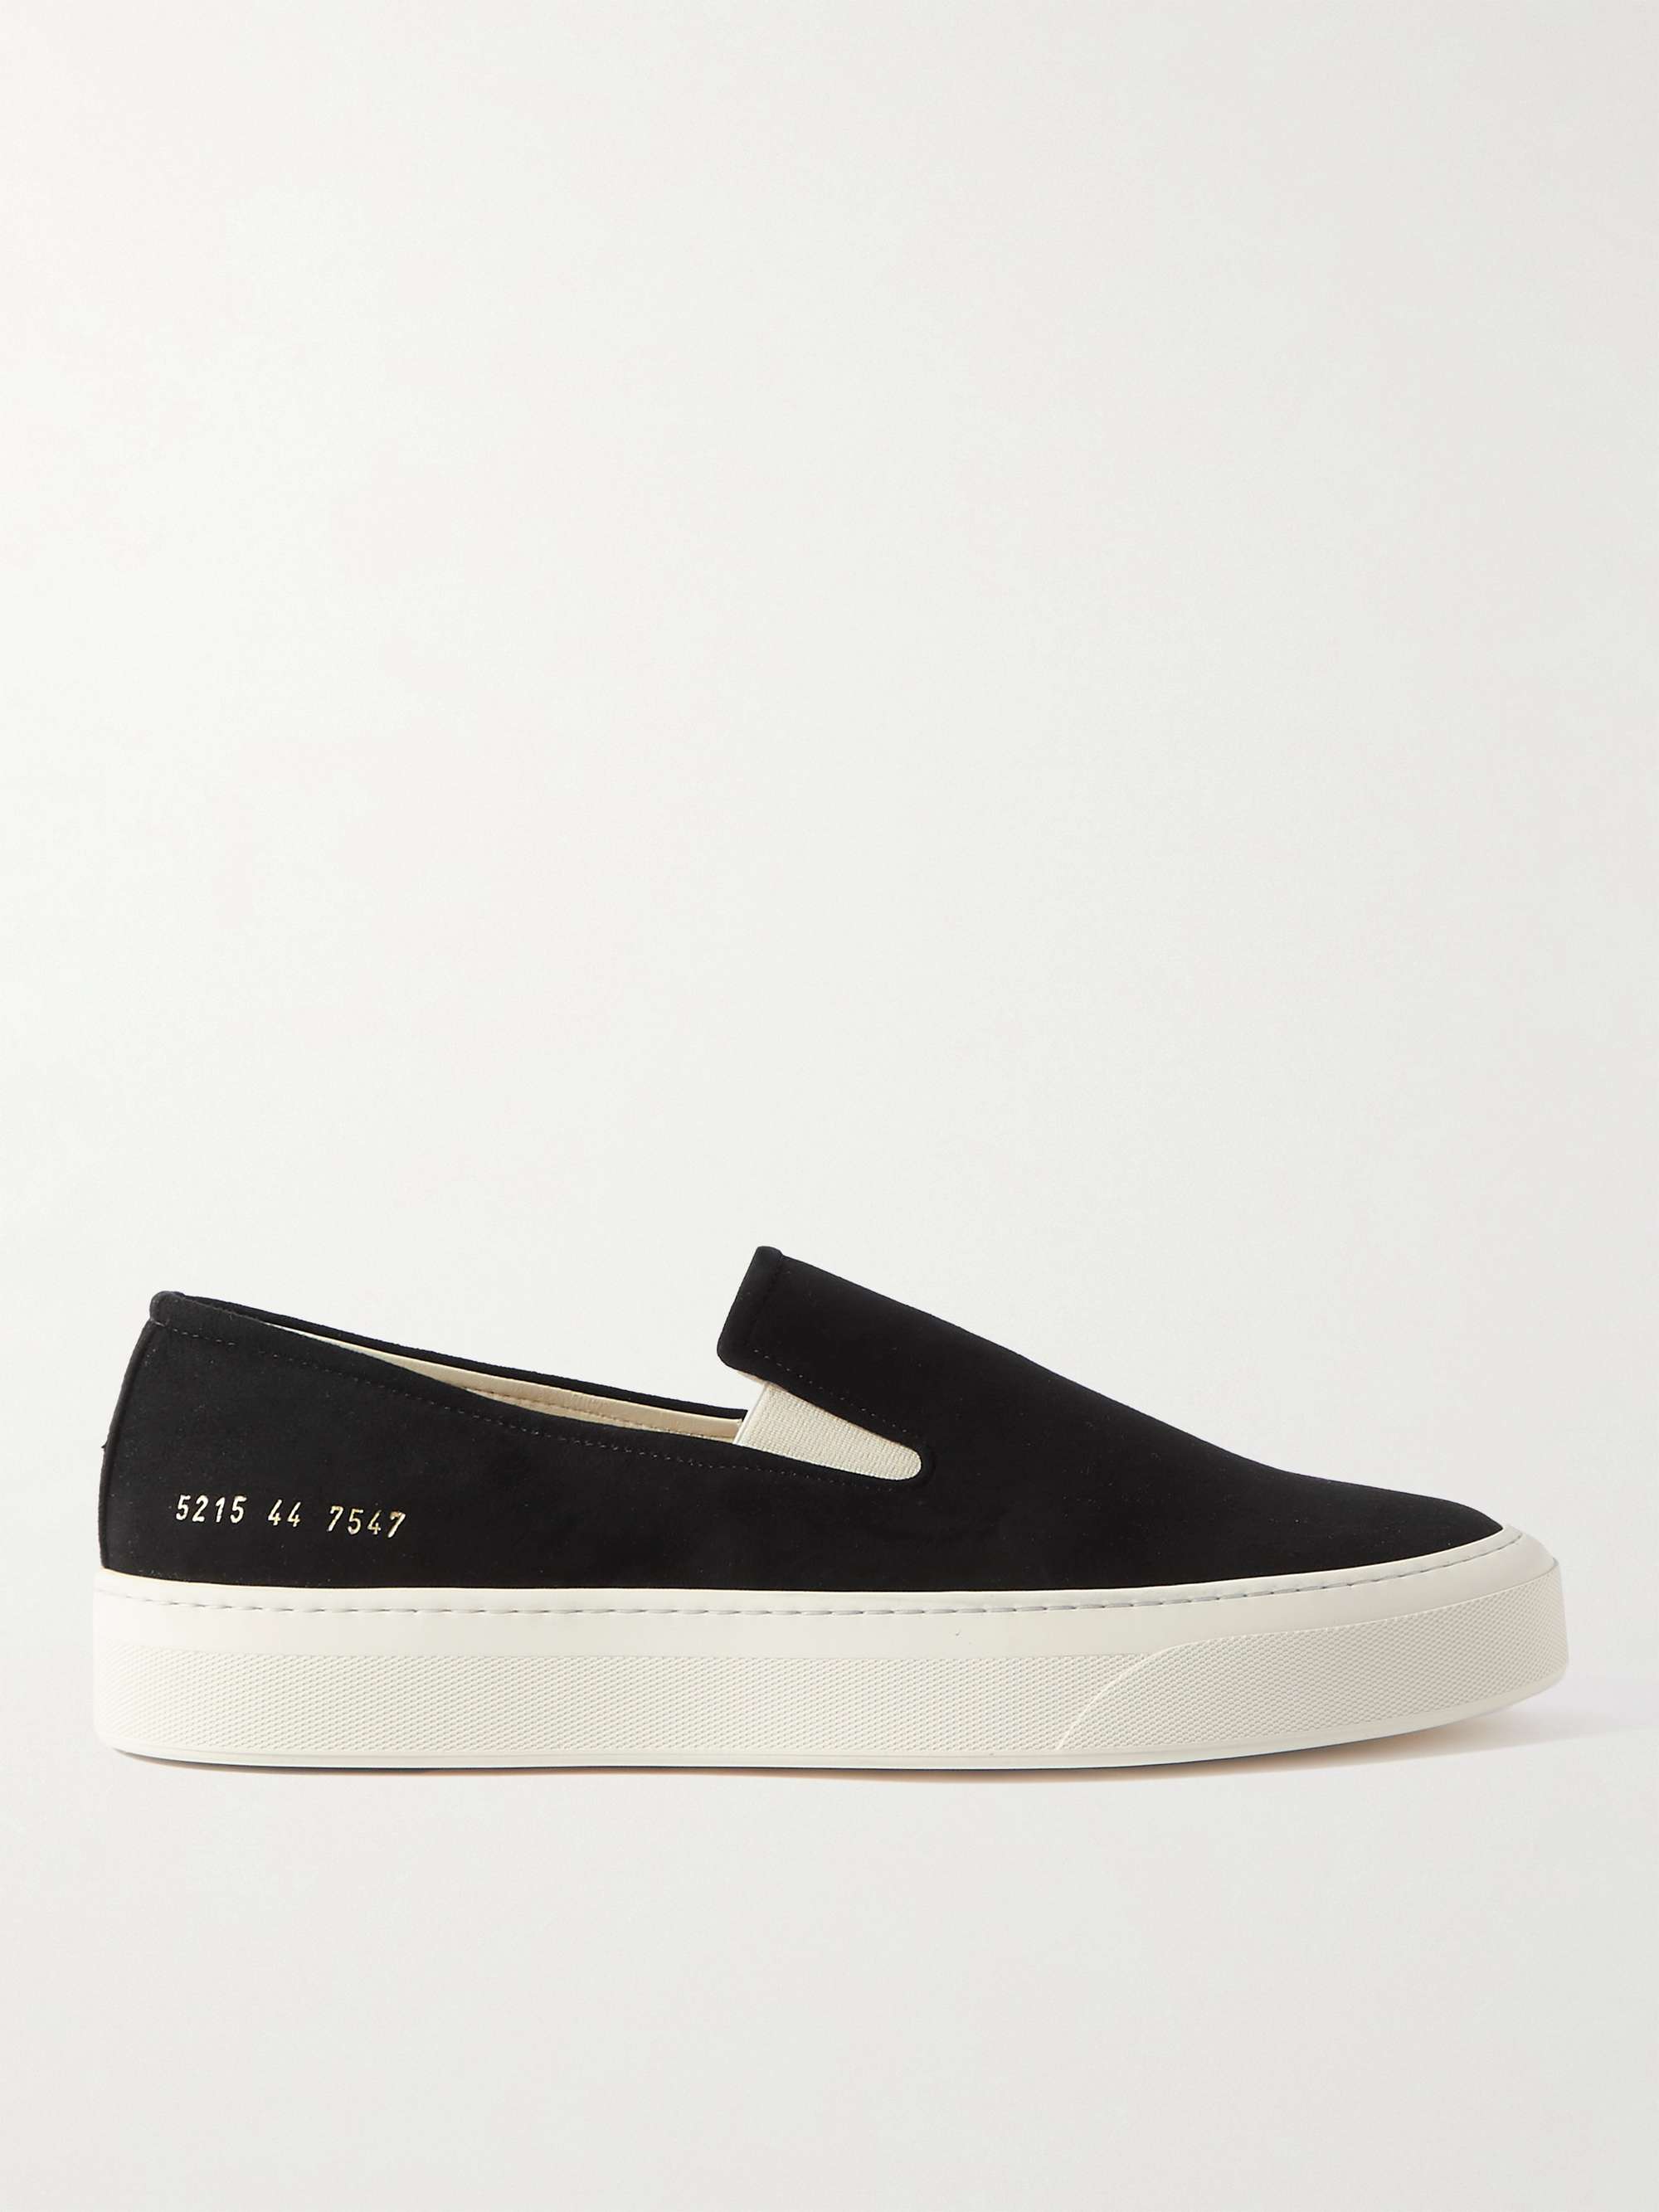 Black Suede Slip-On Sneakers | COMMON PROJECTS | MR PORTER